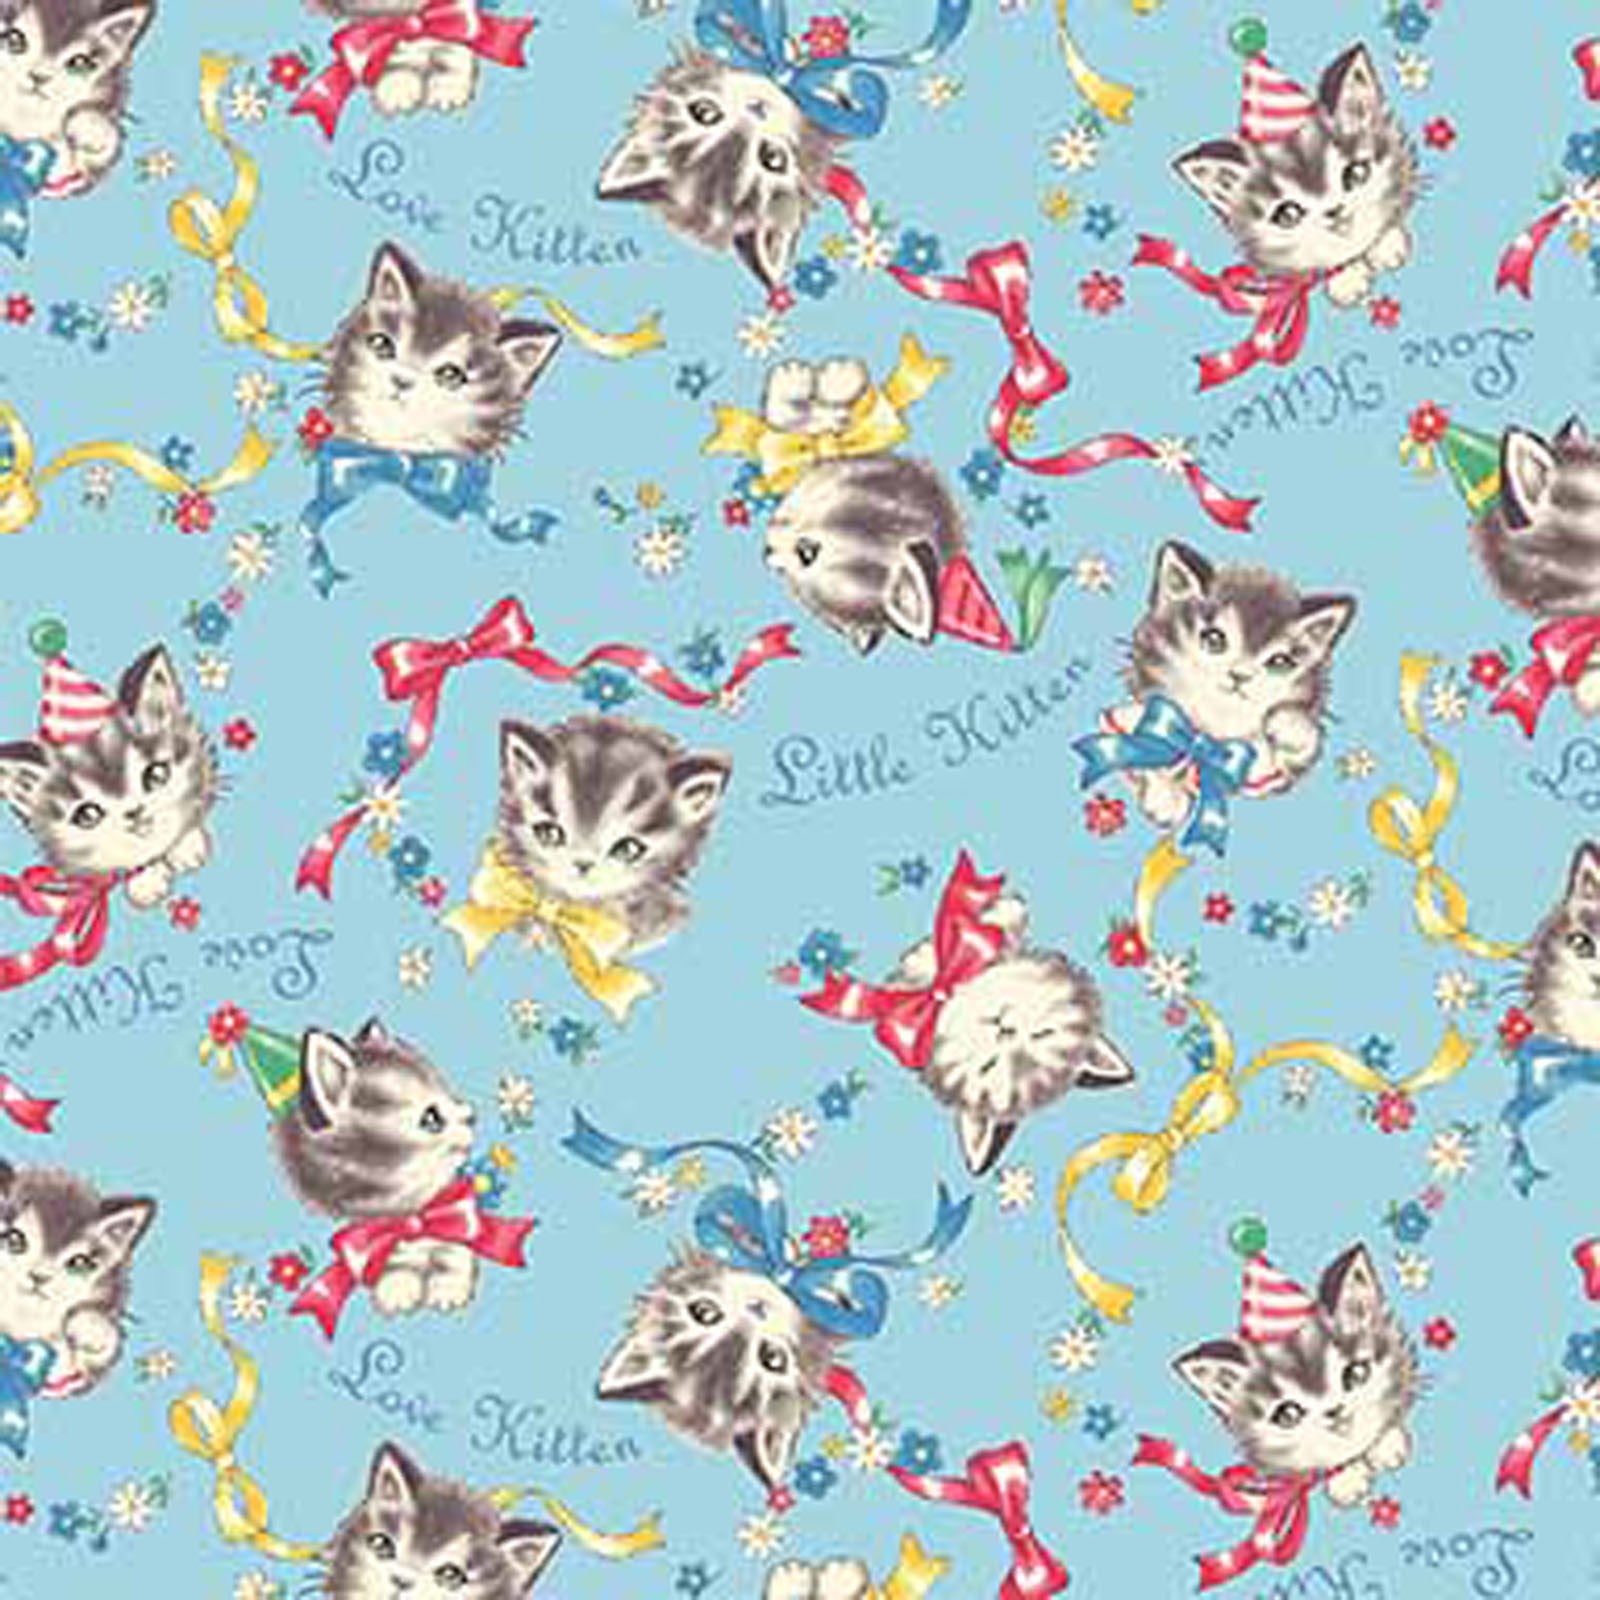 Little World 2021 cotton fabric by Quilt Gate LW2010-12C Kittens on Blue